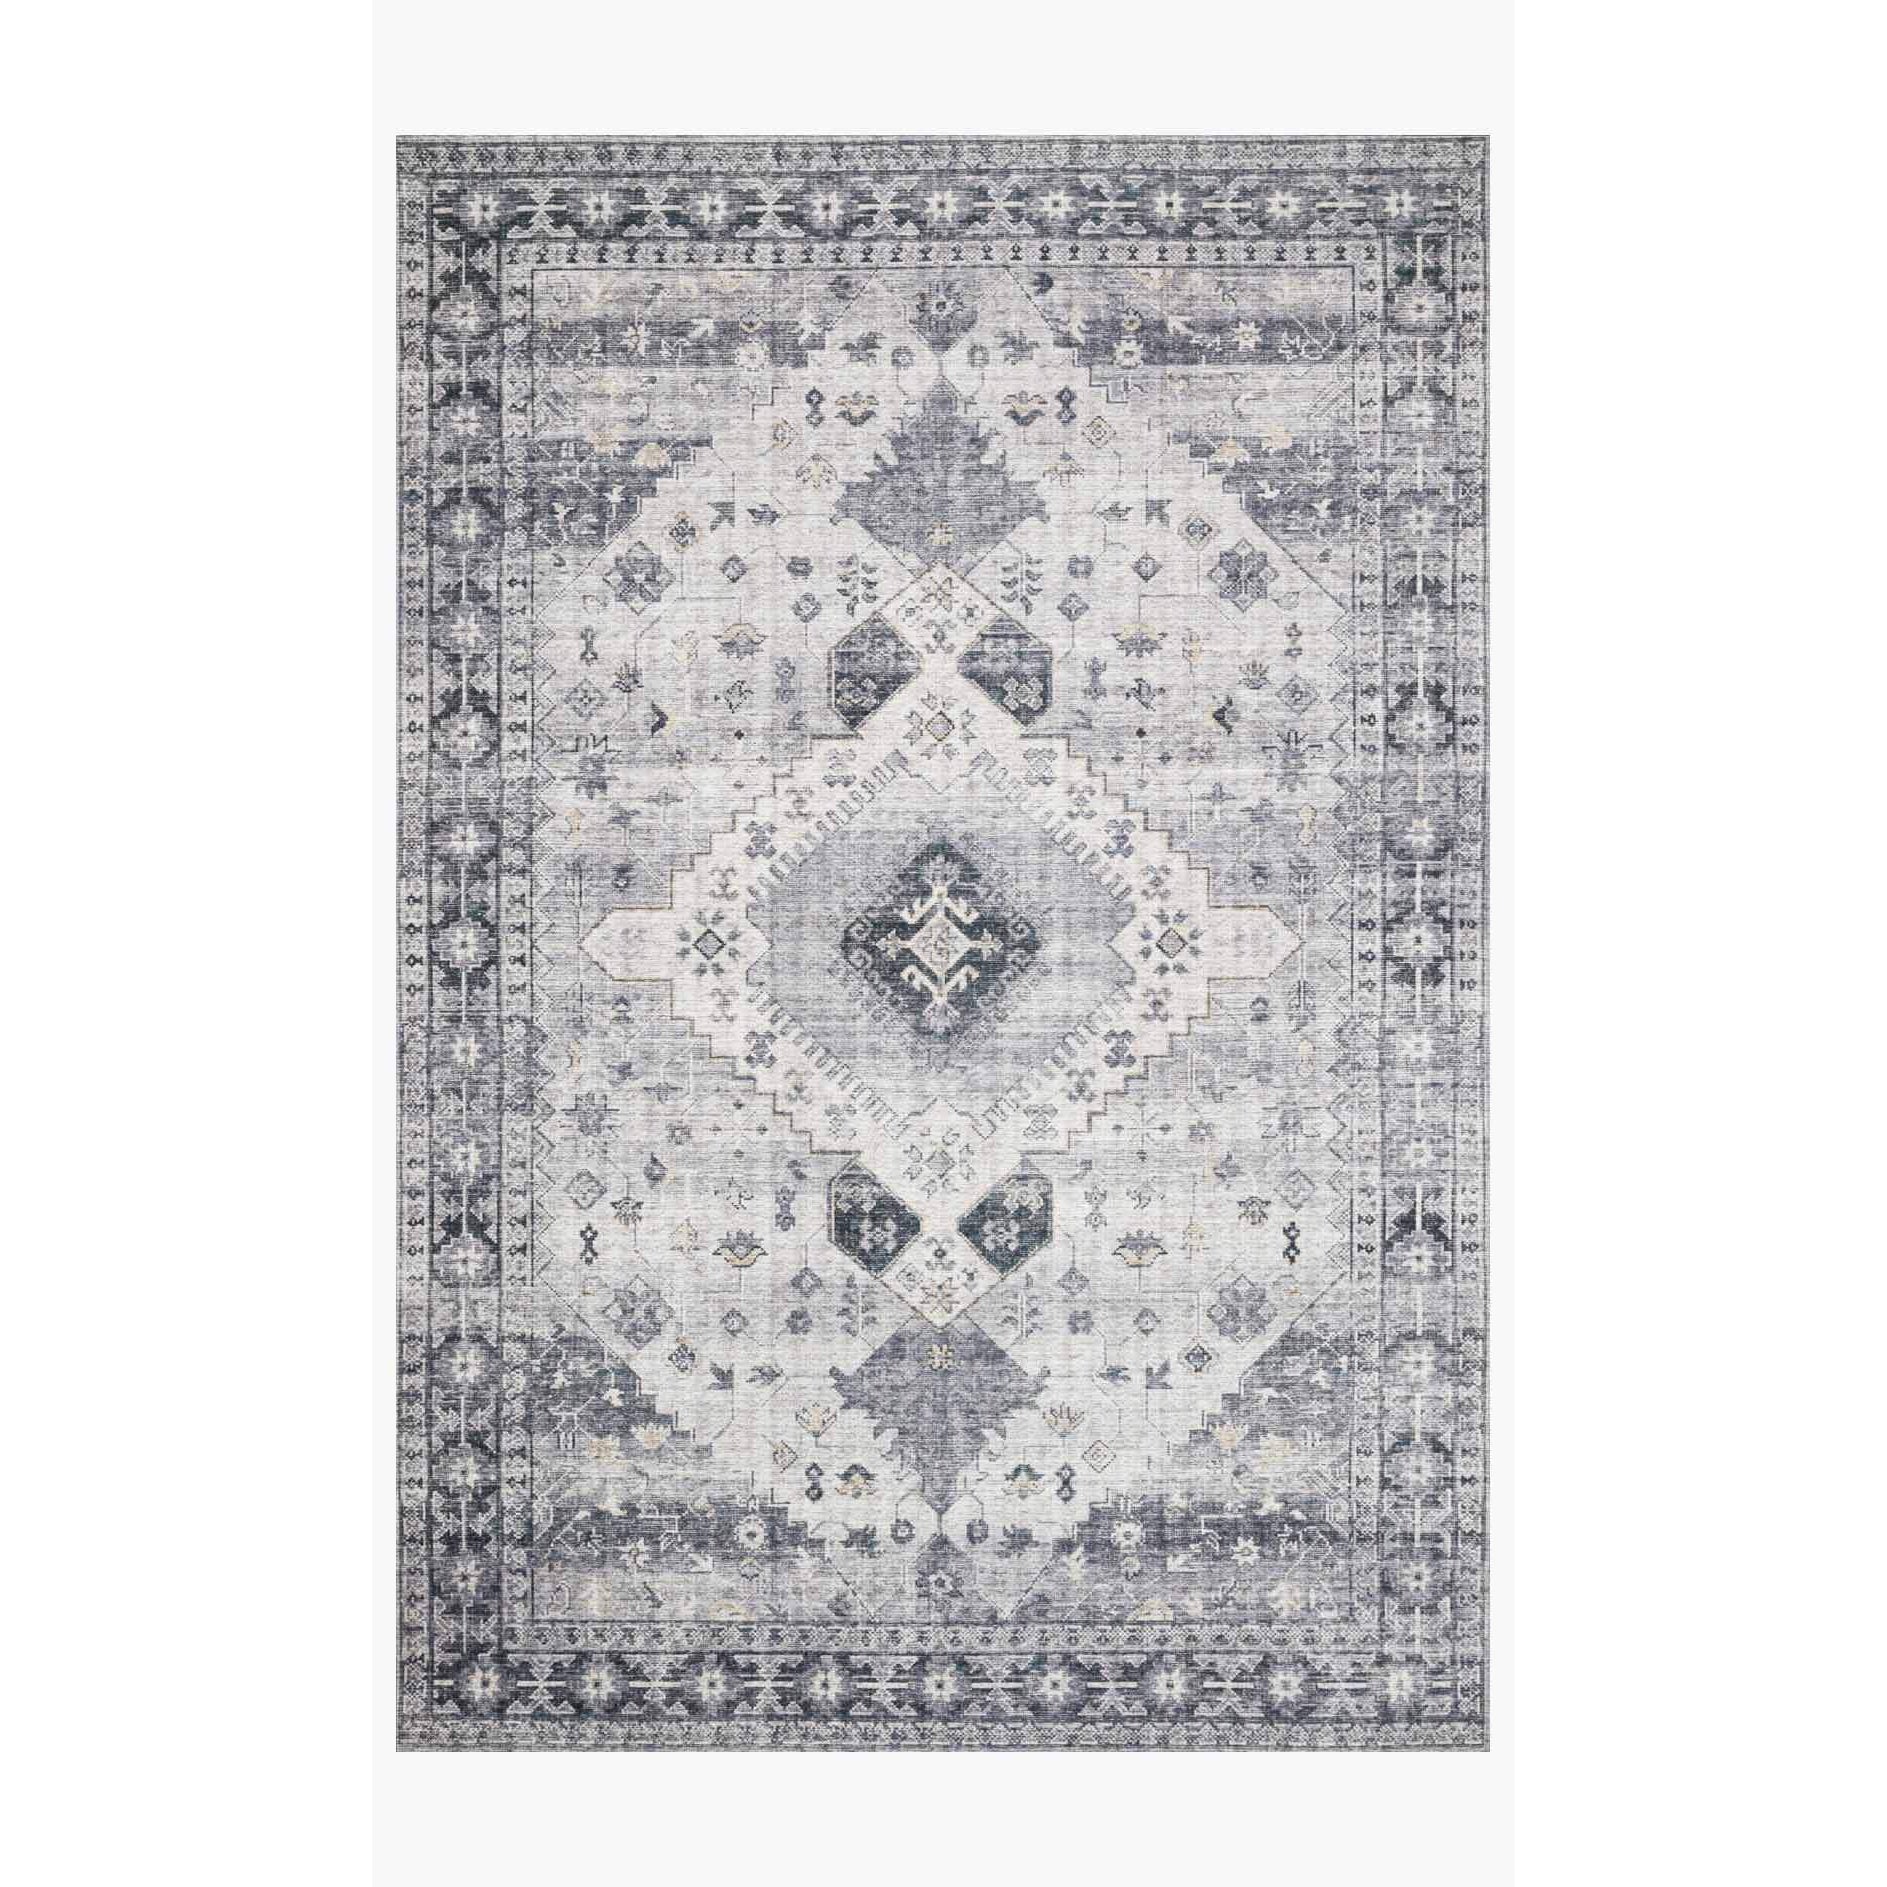 Skye Rug Collection by Loloi -Sky 02 Silver/Grey-Loloi Rugs-Blue Hand Home